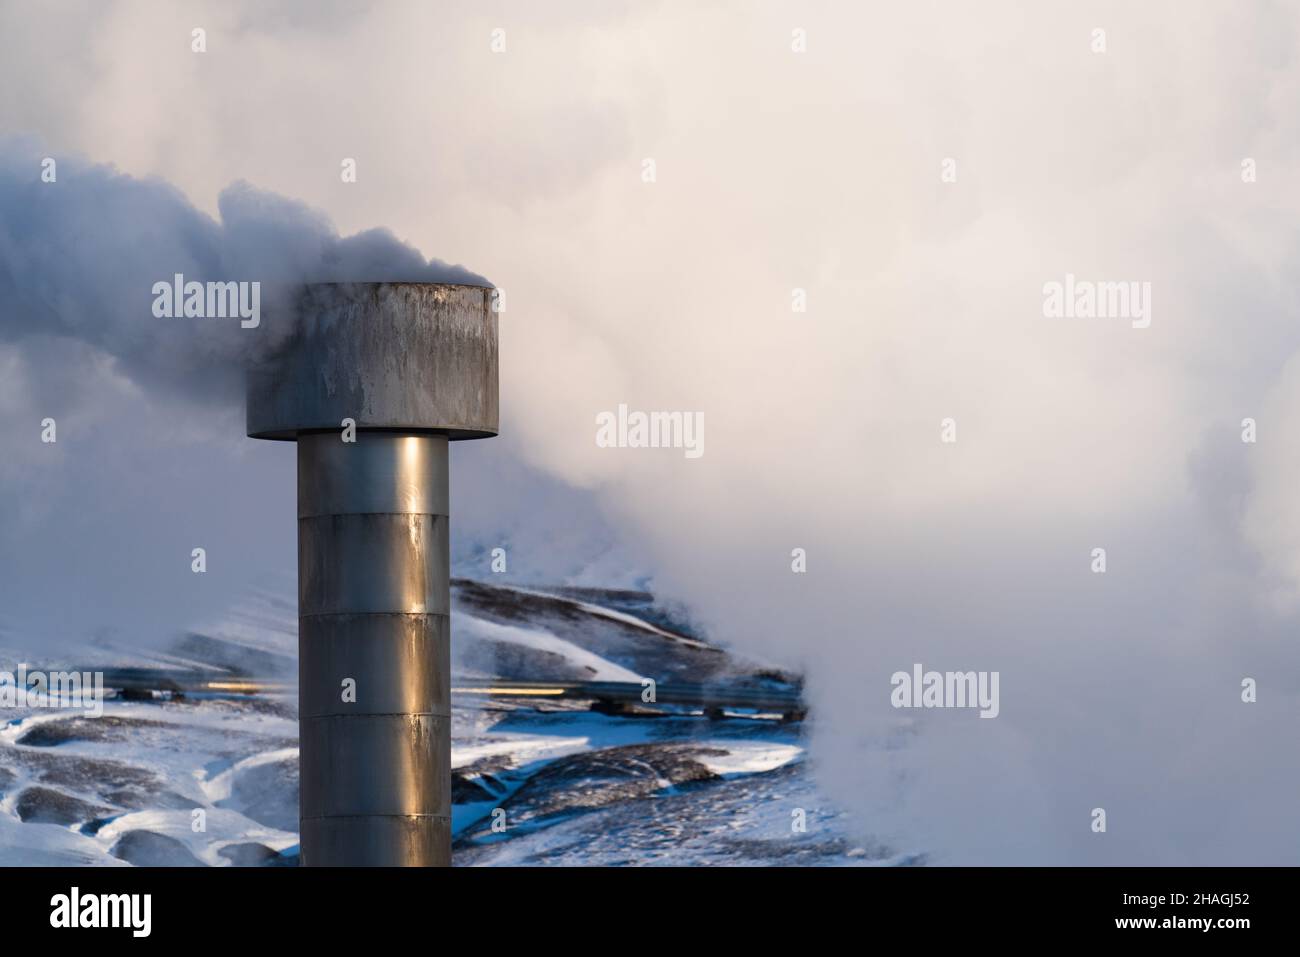 Geothermic plant chimney with with smoke Stock Photo